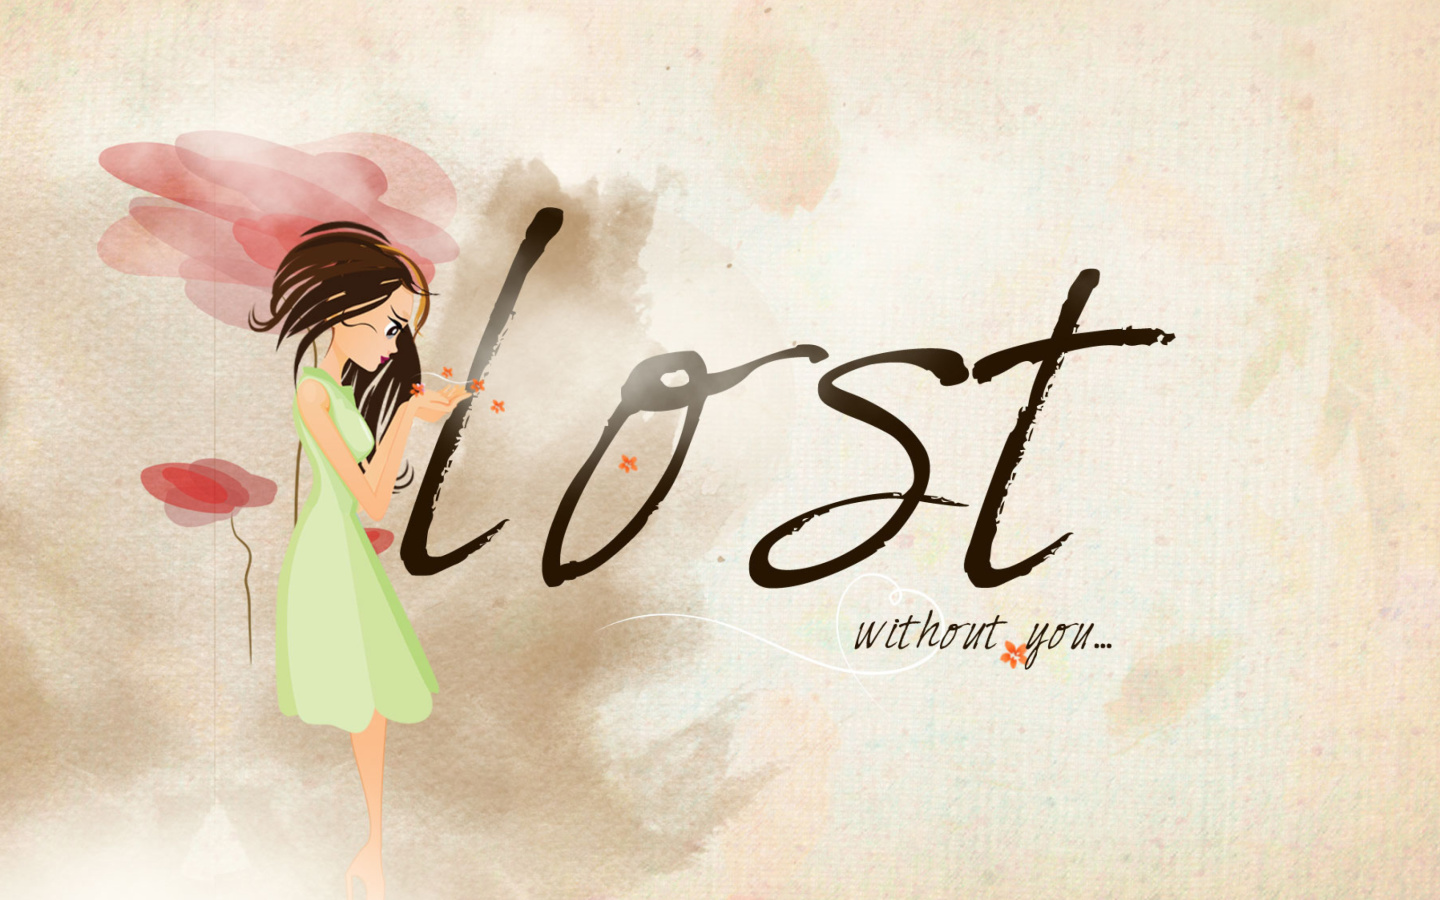 Das Lost Without You Wallpaper 1440x900